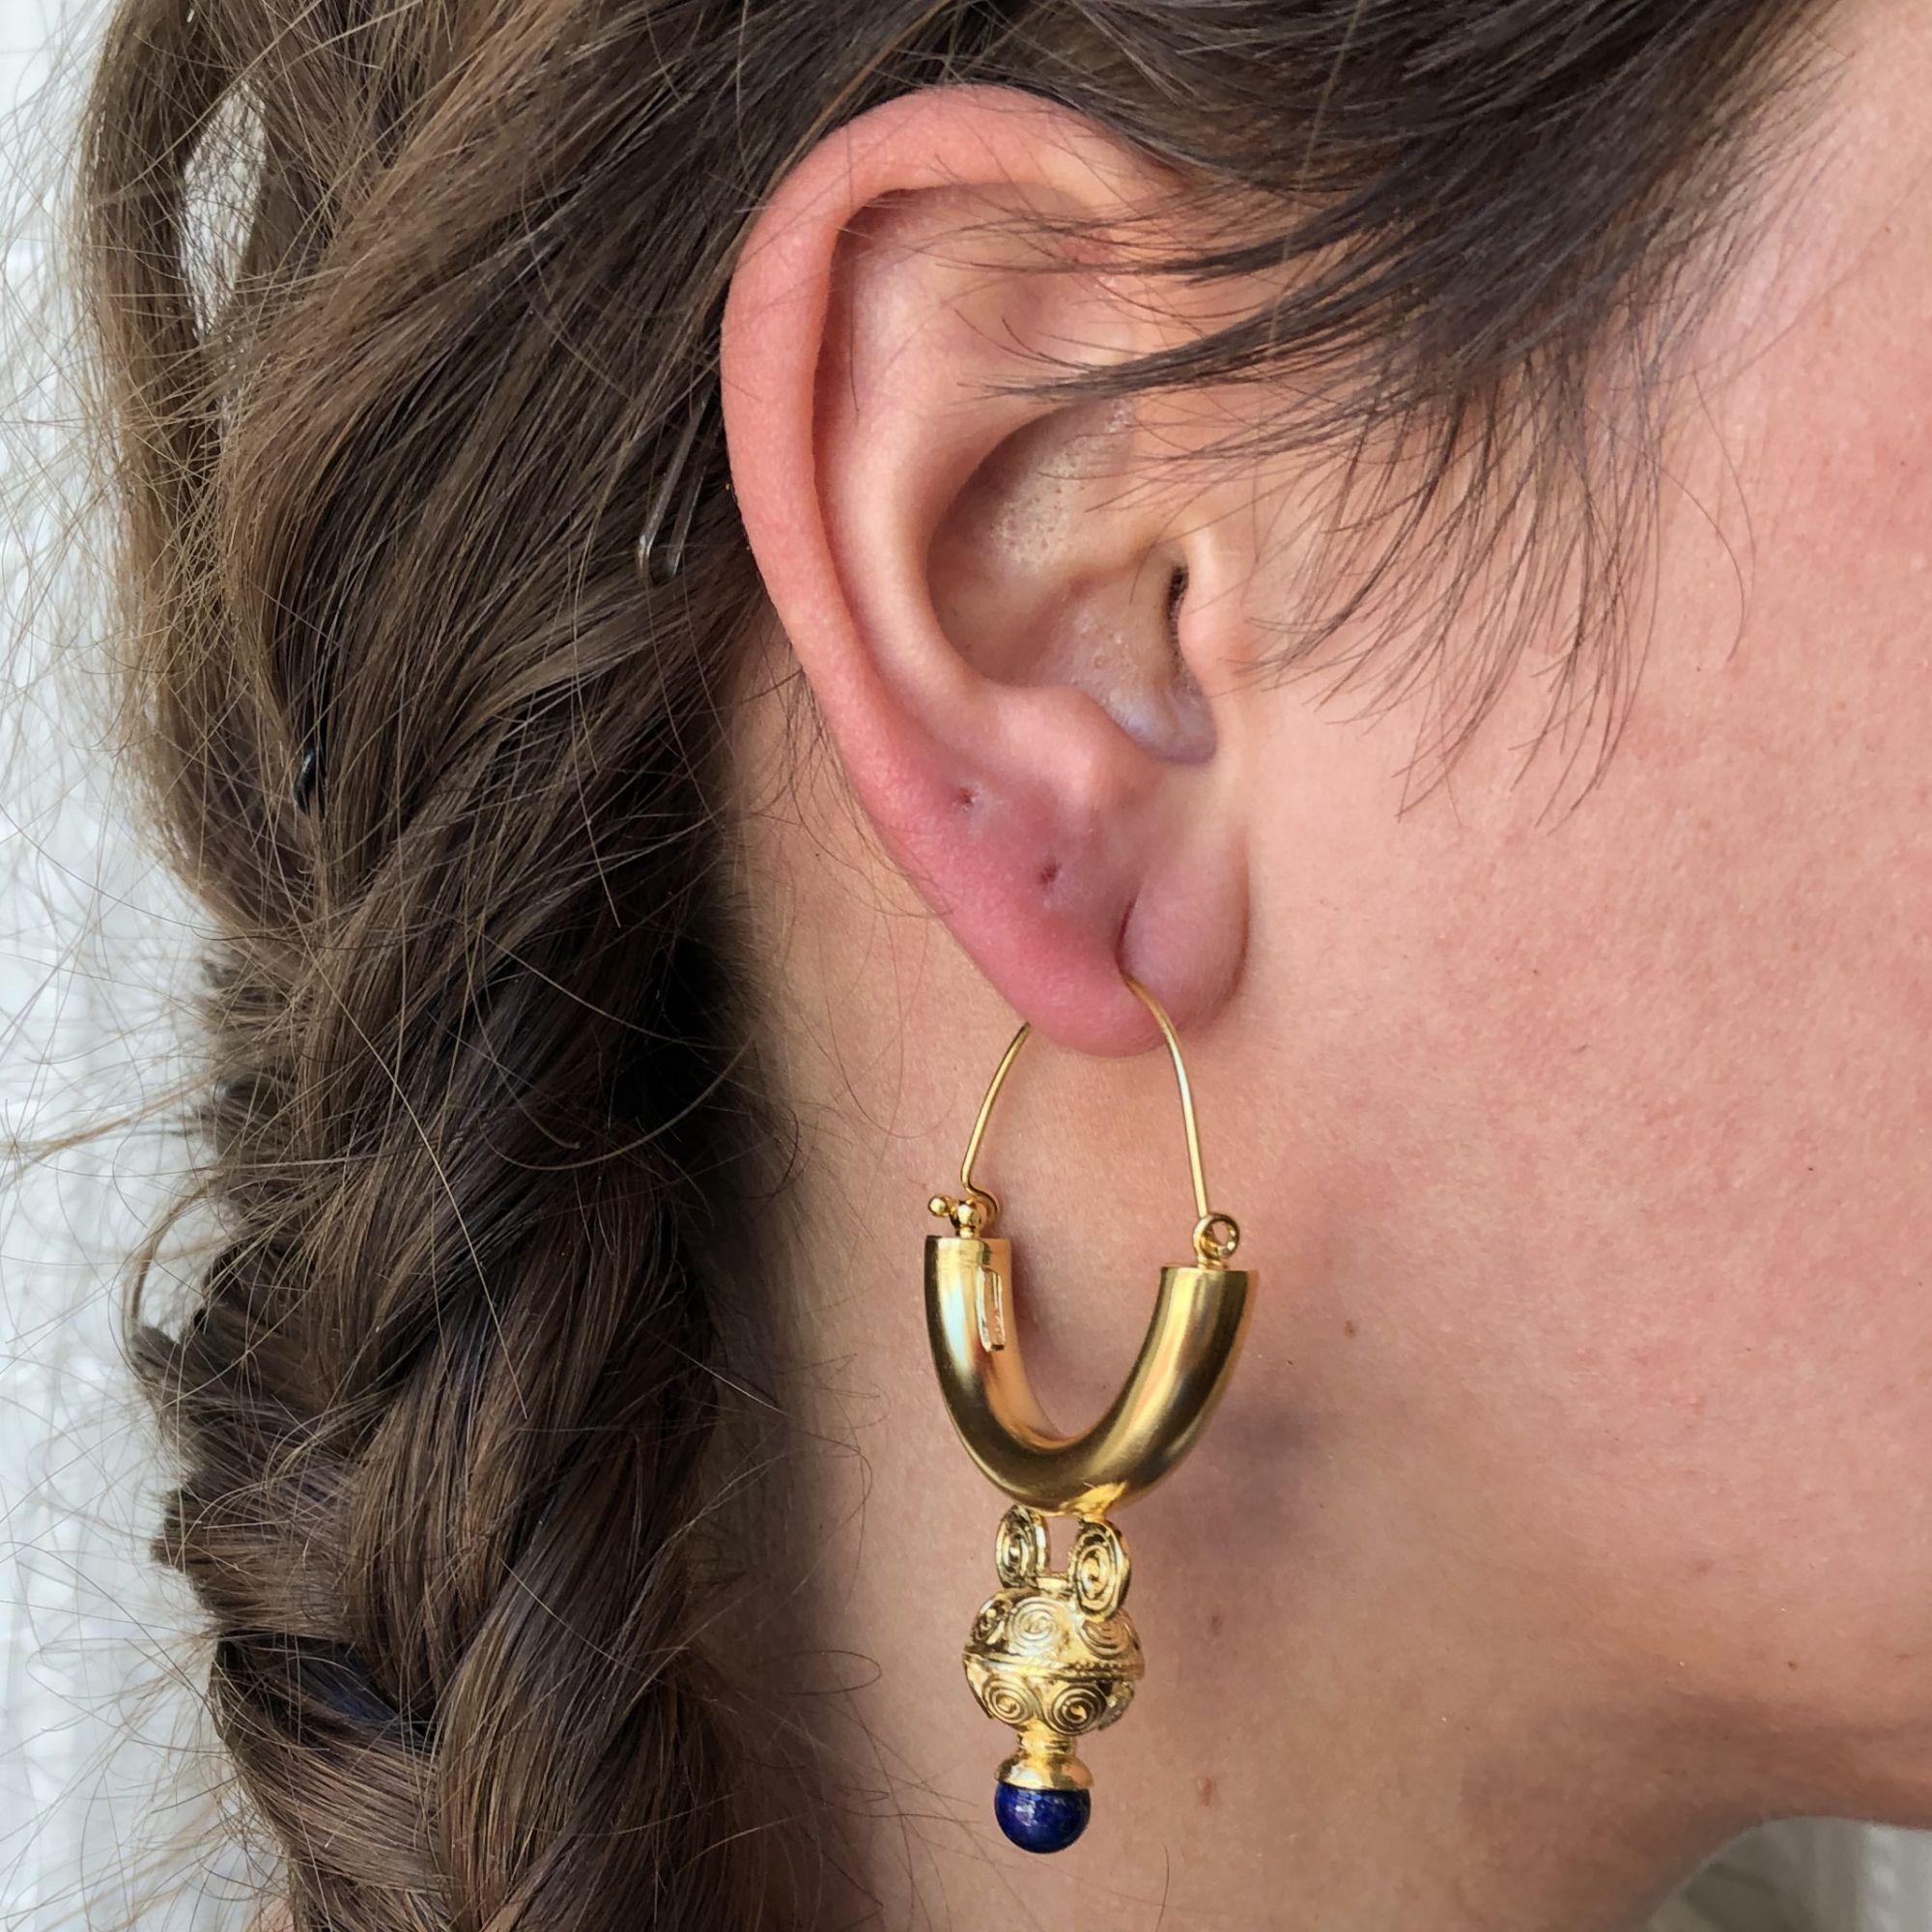 For pierced ears.
Pair of earrings in silver, yellow gold and vermeil.
Important creoles that are threaded through the back of the ear, they support each one a chiseled pattern of Etruscan motifs that ends with a blue glass pearl.
Height : 5.9 cm,